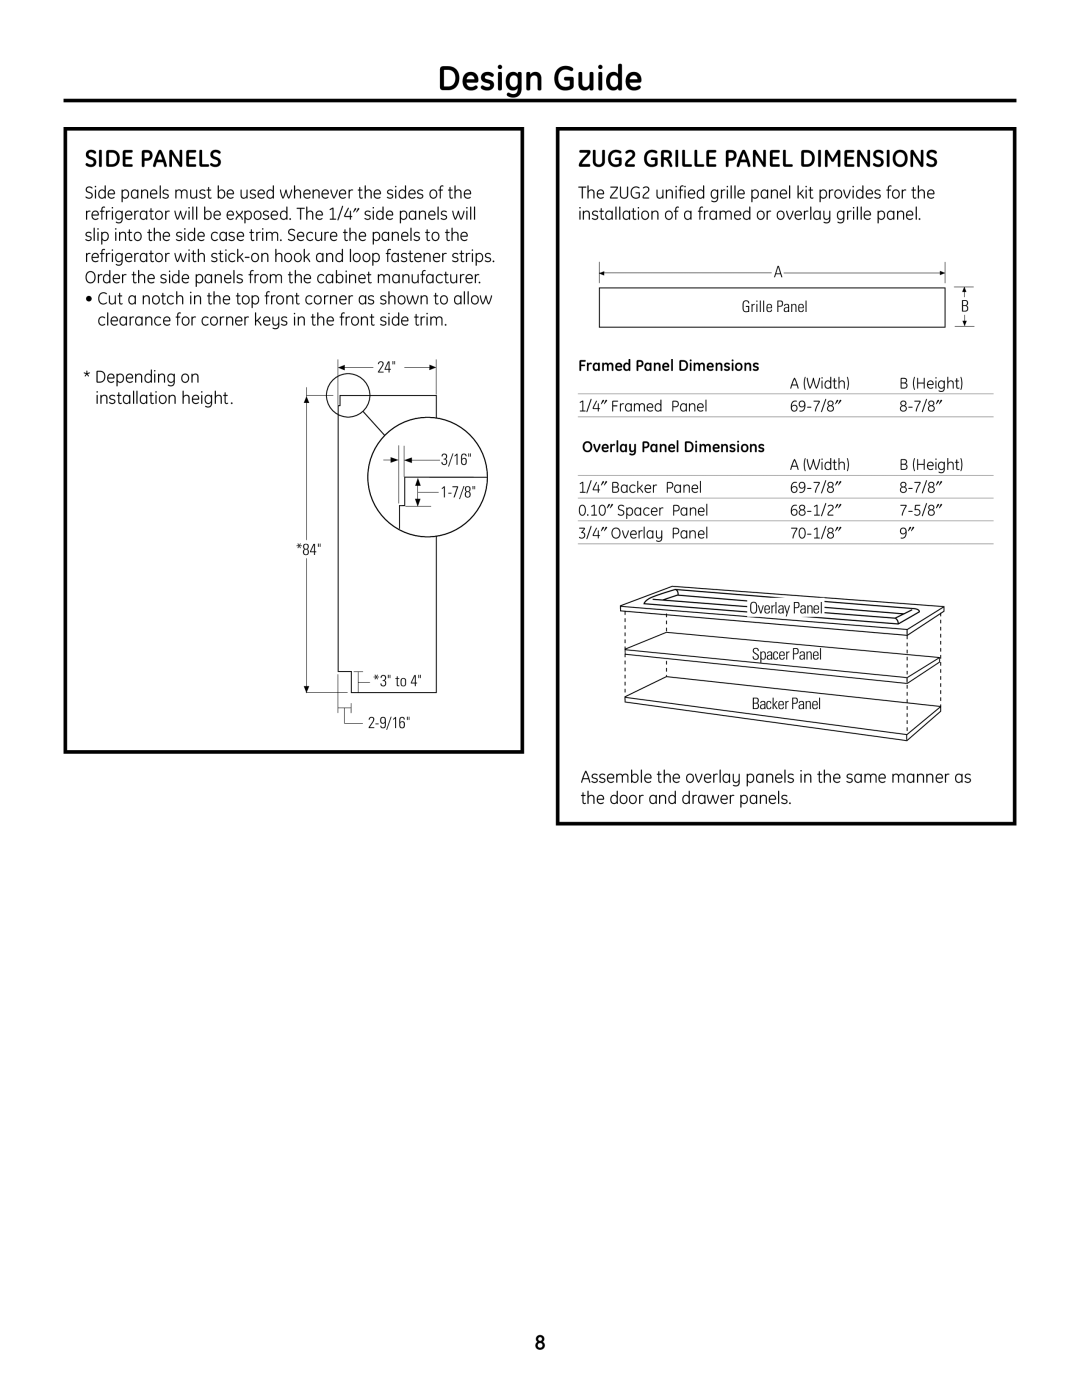 GE 49-60468-1 installation instructions Side Panels, ZUG2 GRILLE PANEL DIMENSIONS, Design Guide 